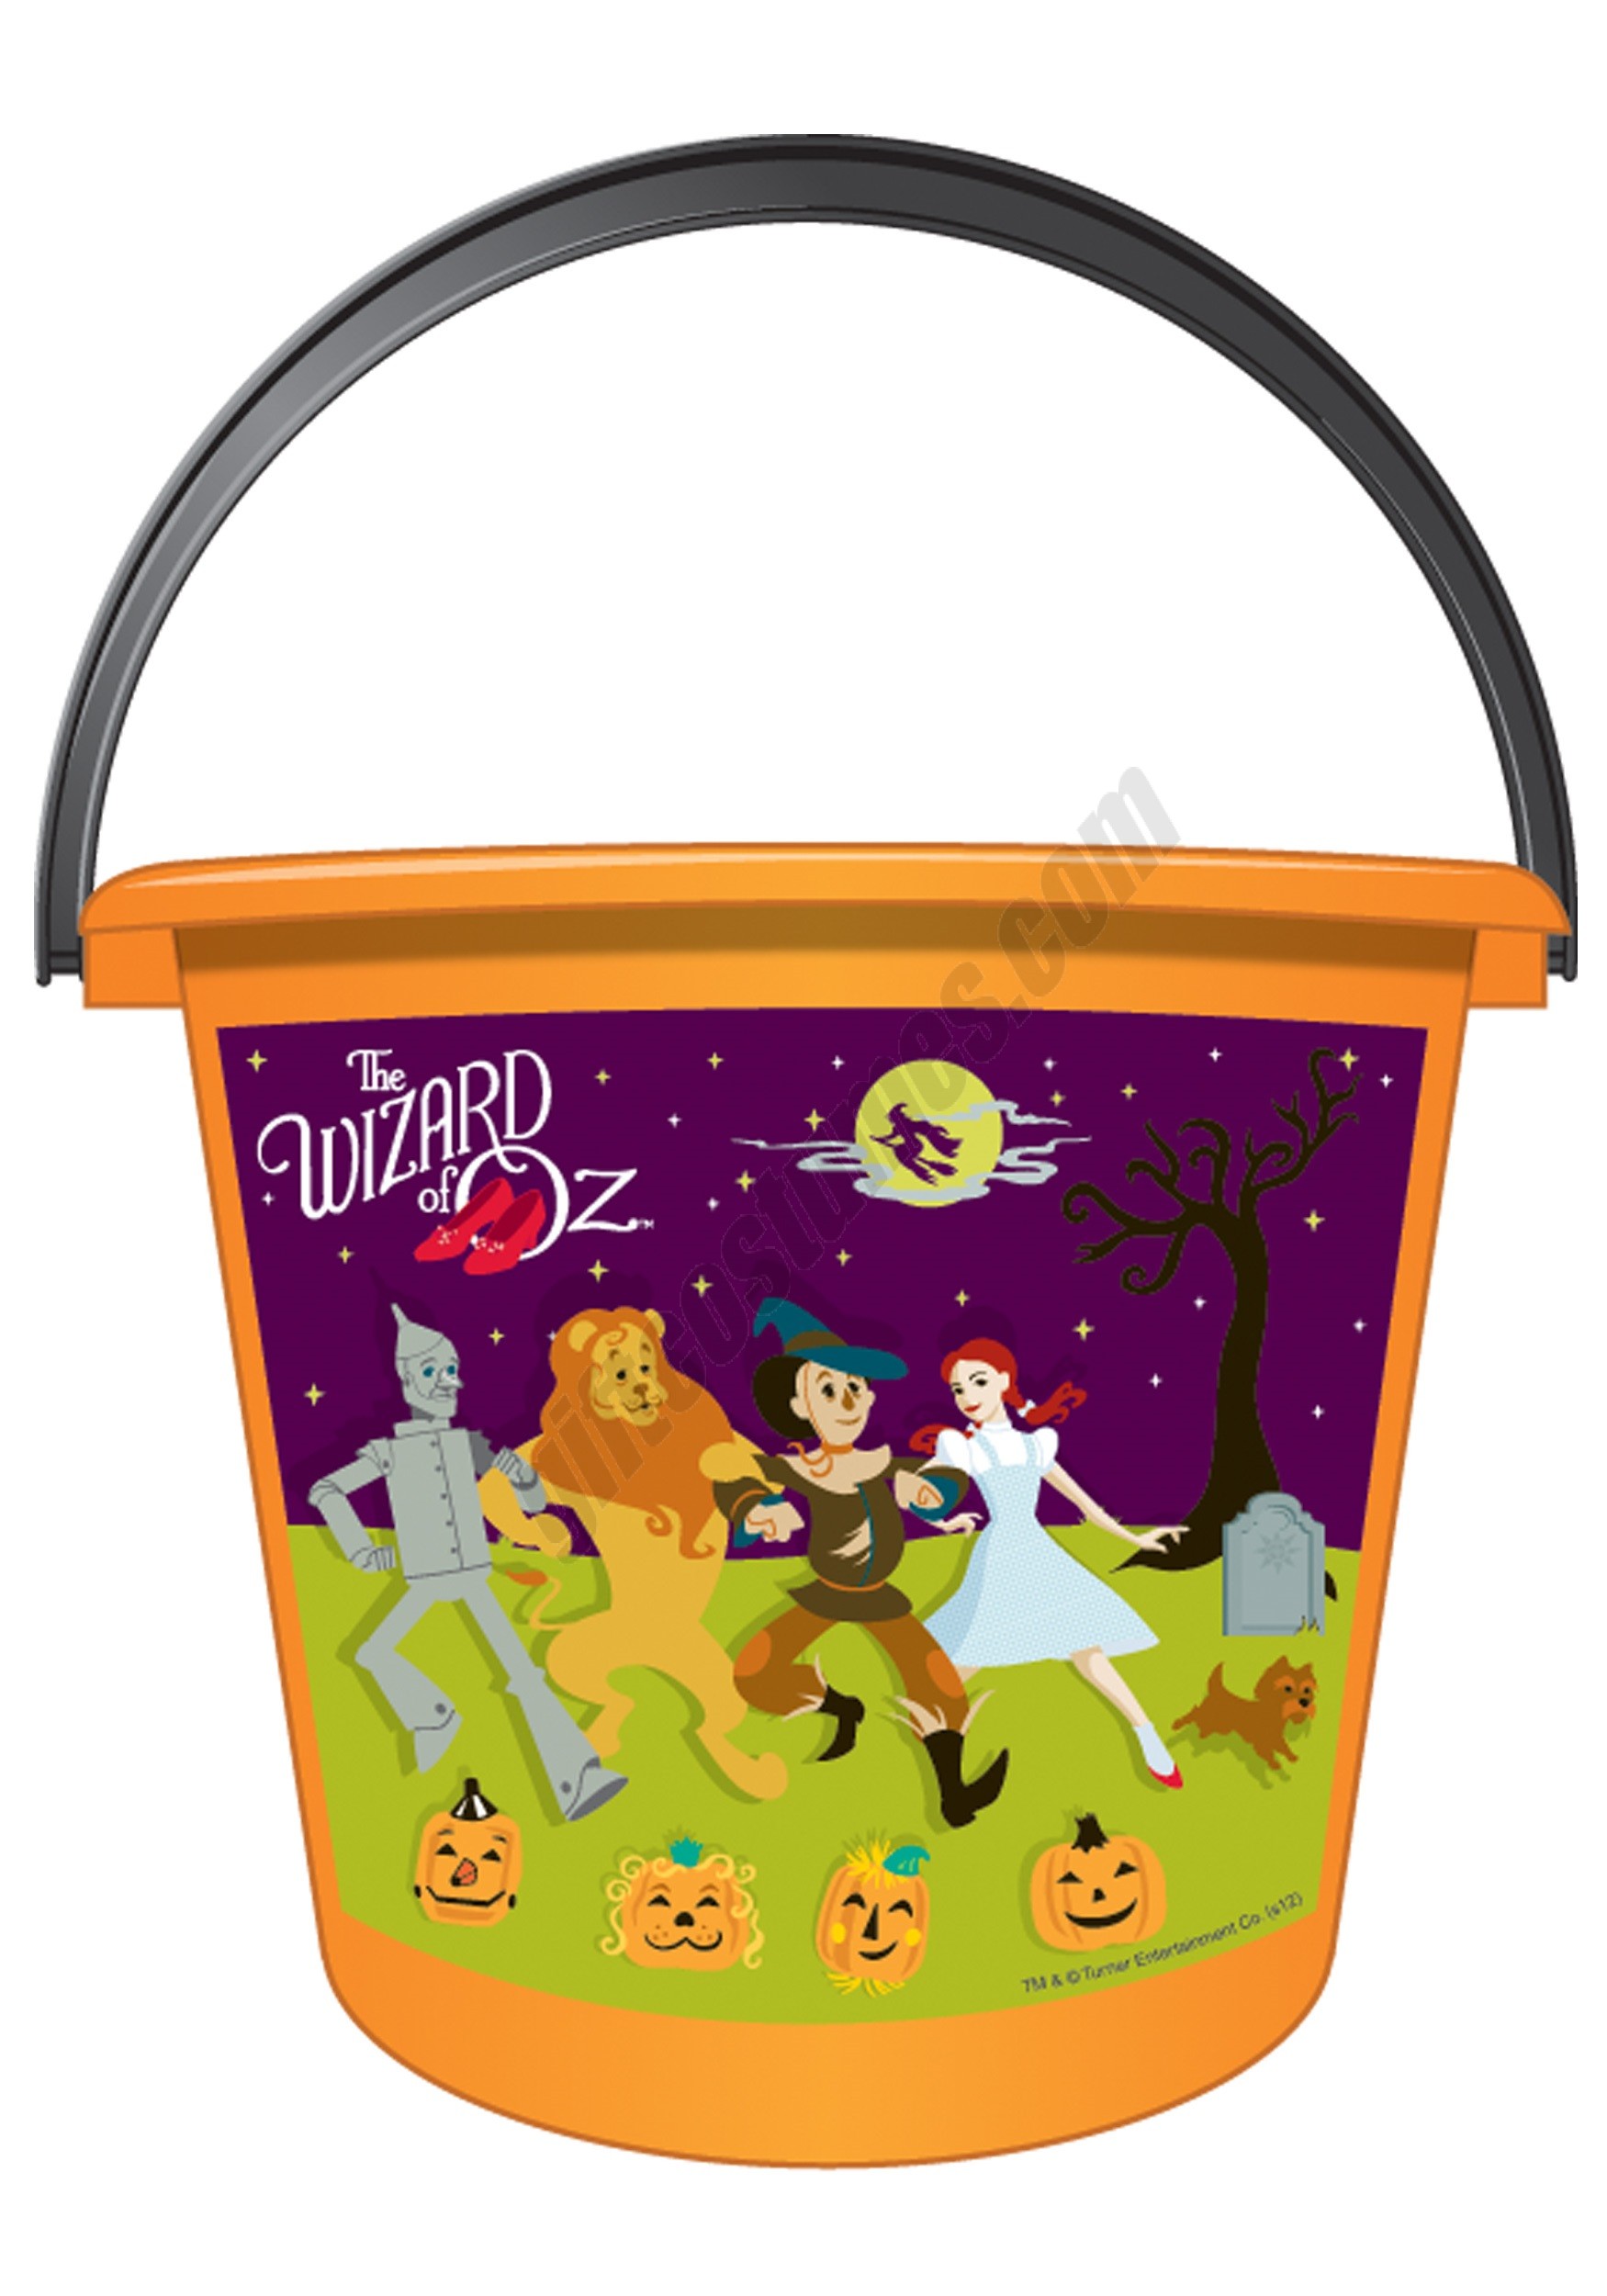 Wizard of Oz Candy Pail Promotions - Wizard of Oz Candy Pail Promotions